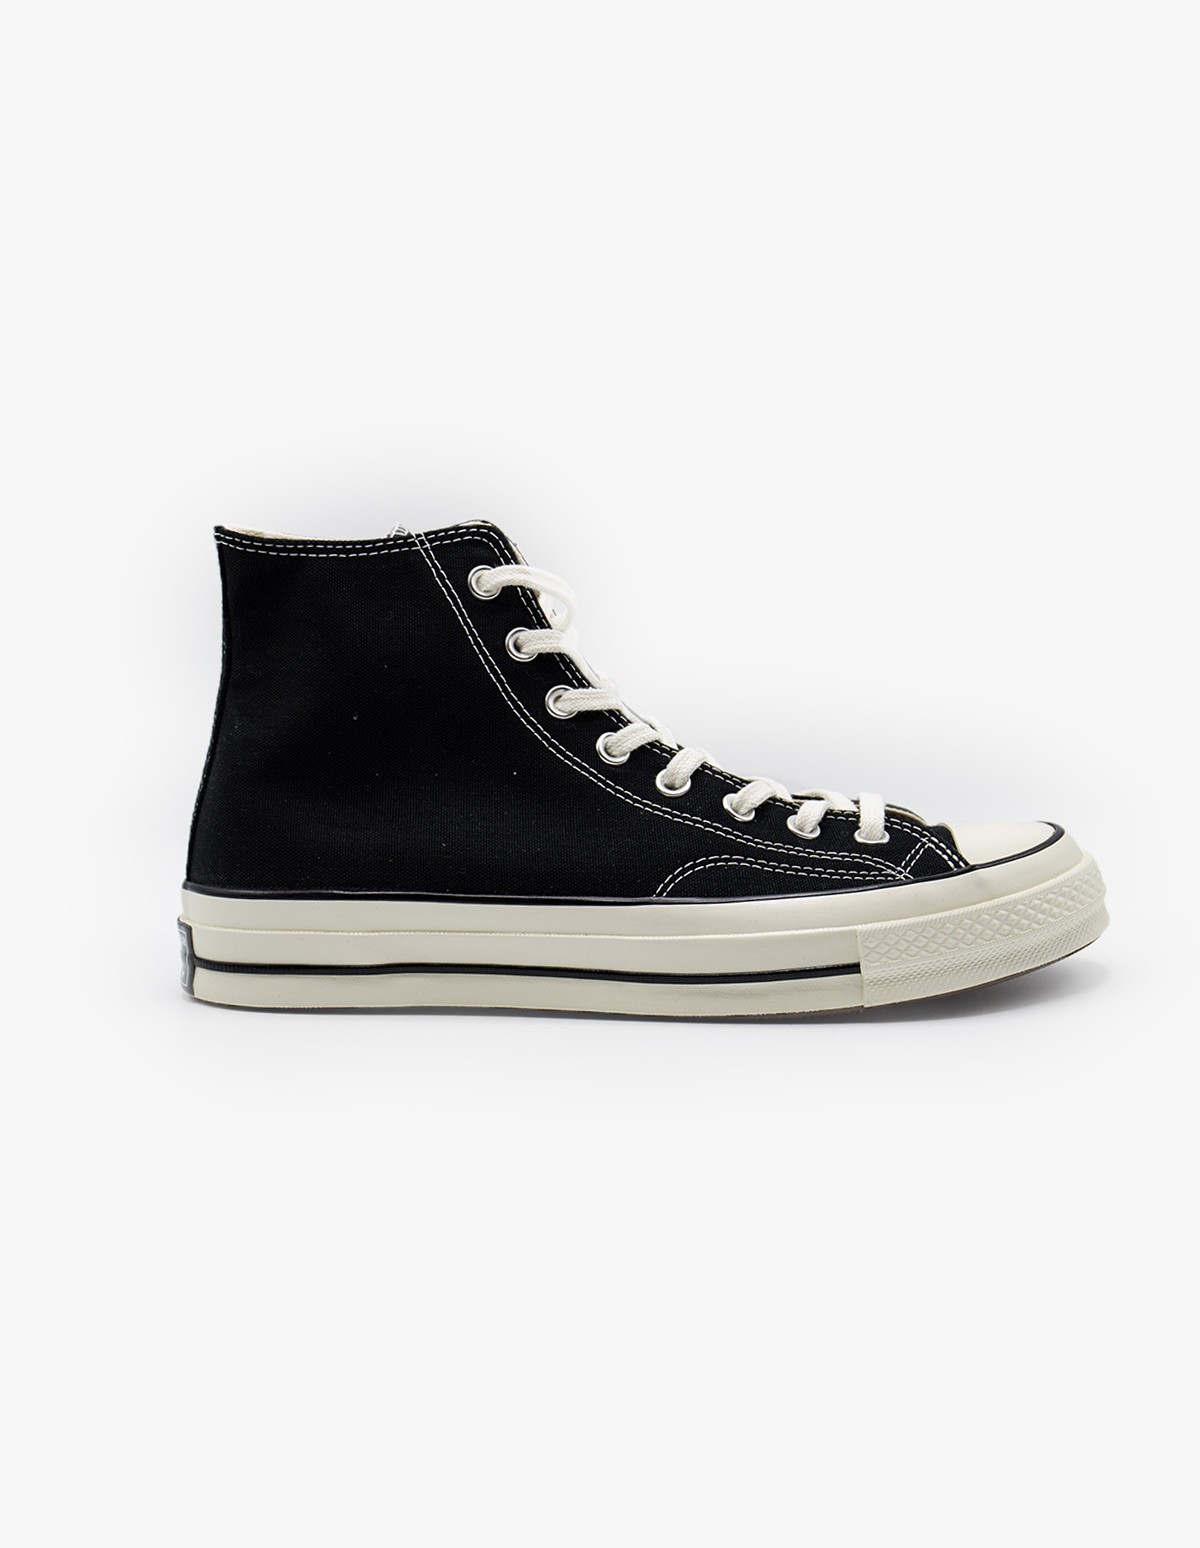 Converse - Chuck Taylor All Star '70 in Black | Afura Store